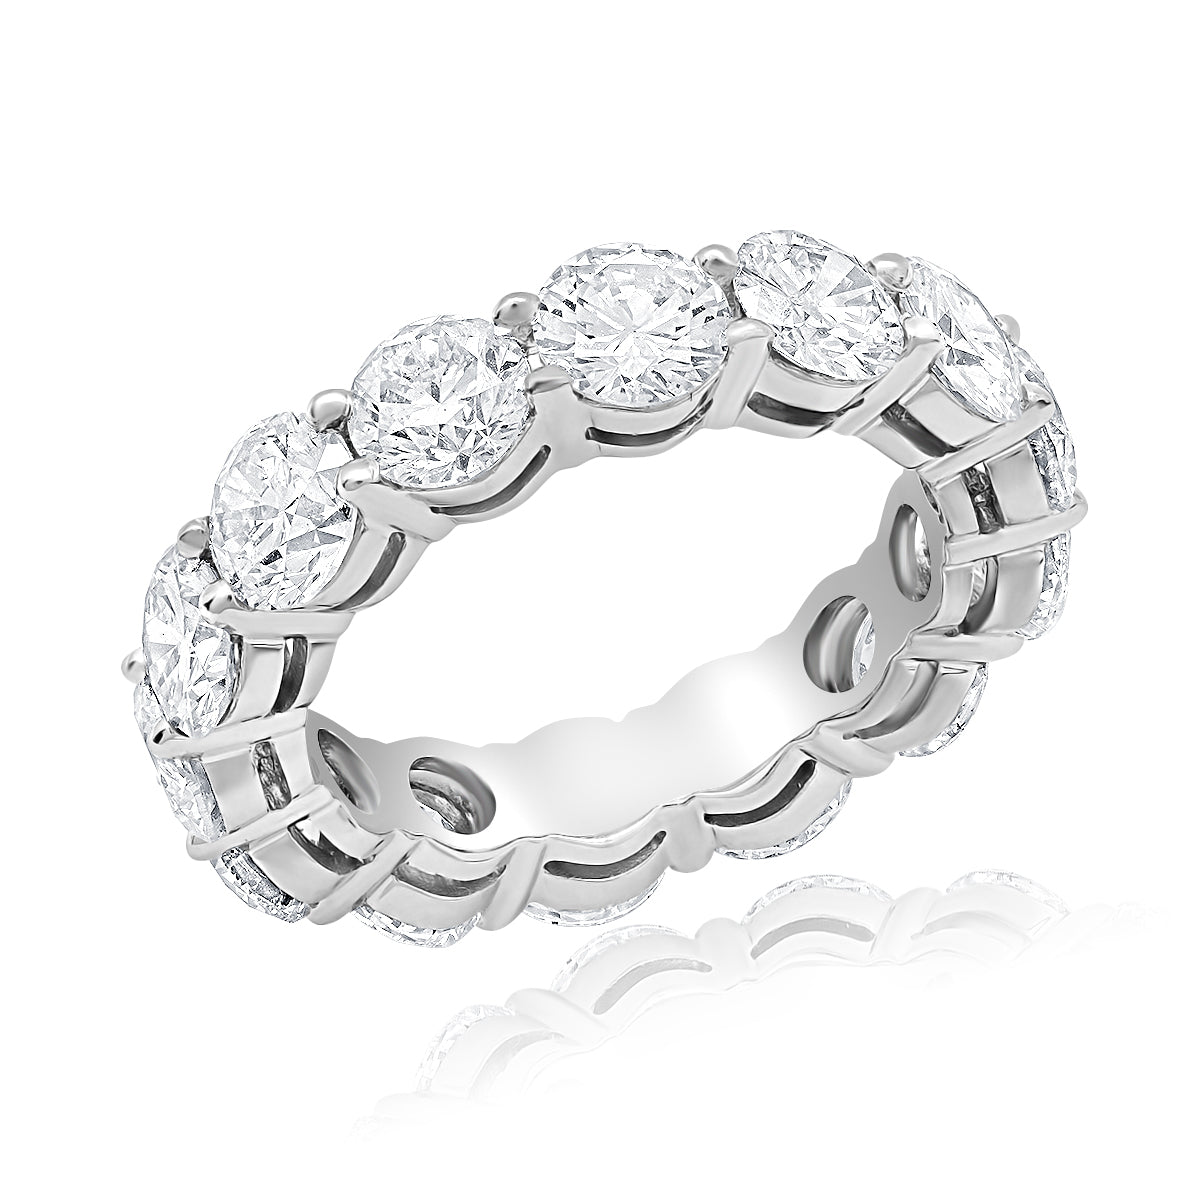 Why Choose Round Cut Eternity Bands?